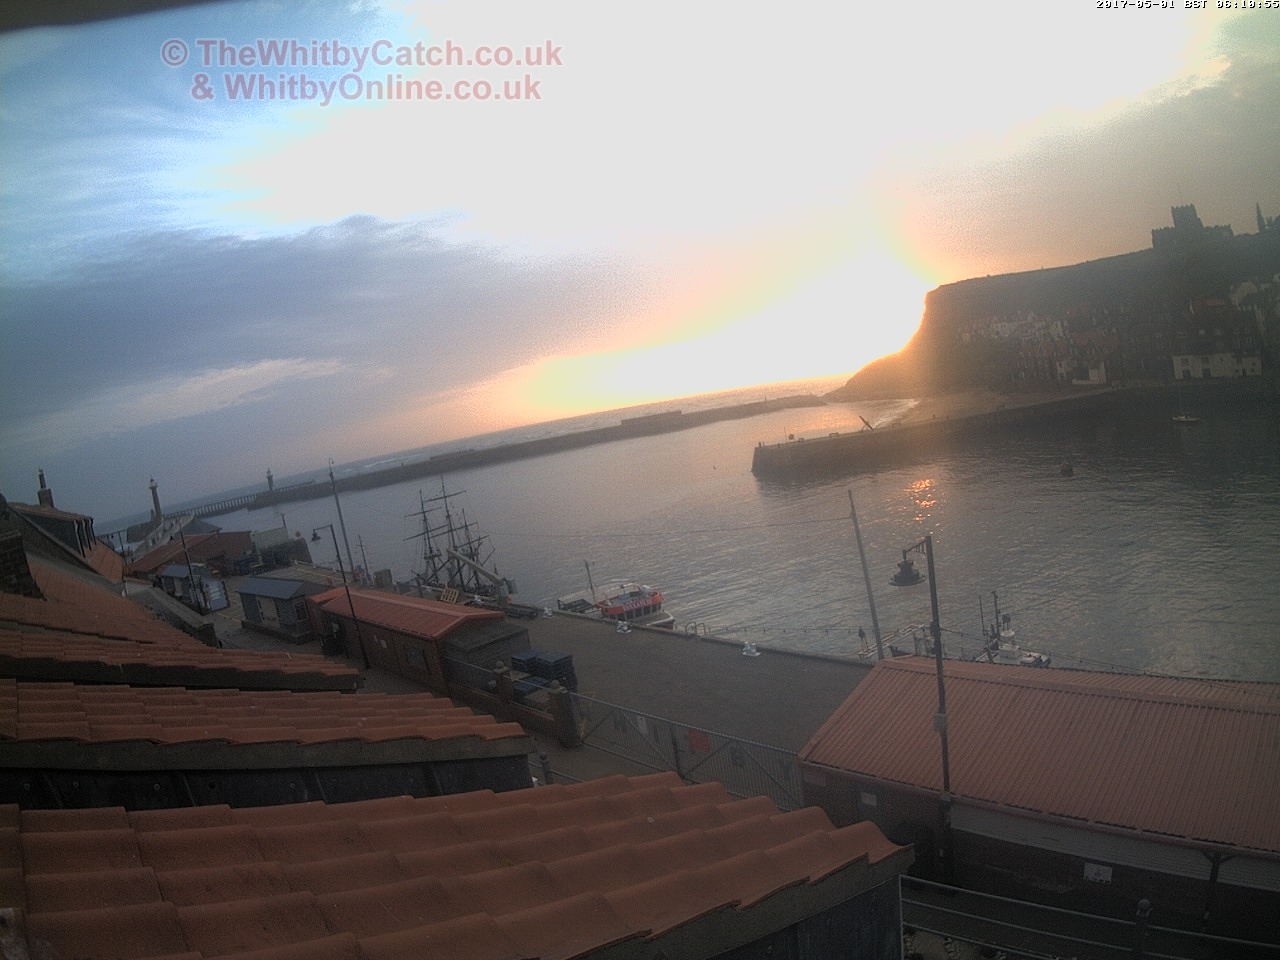 Whitby Mon 1st May 2017 06:11.